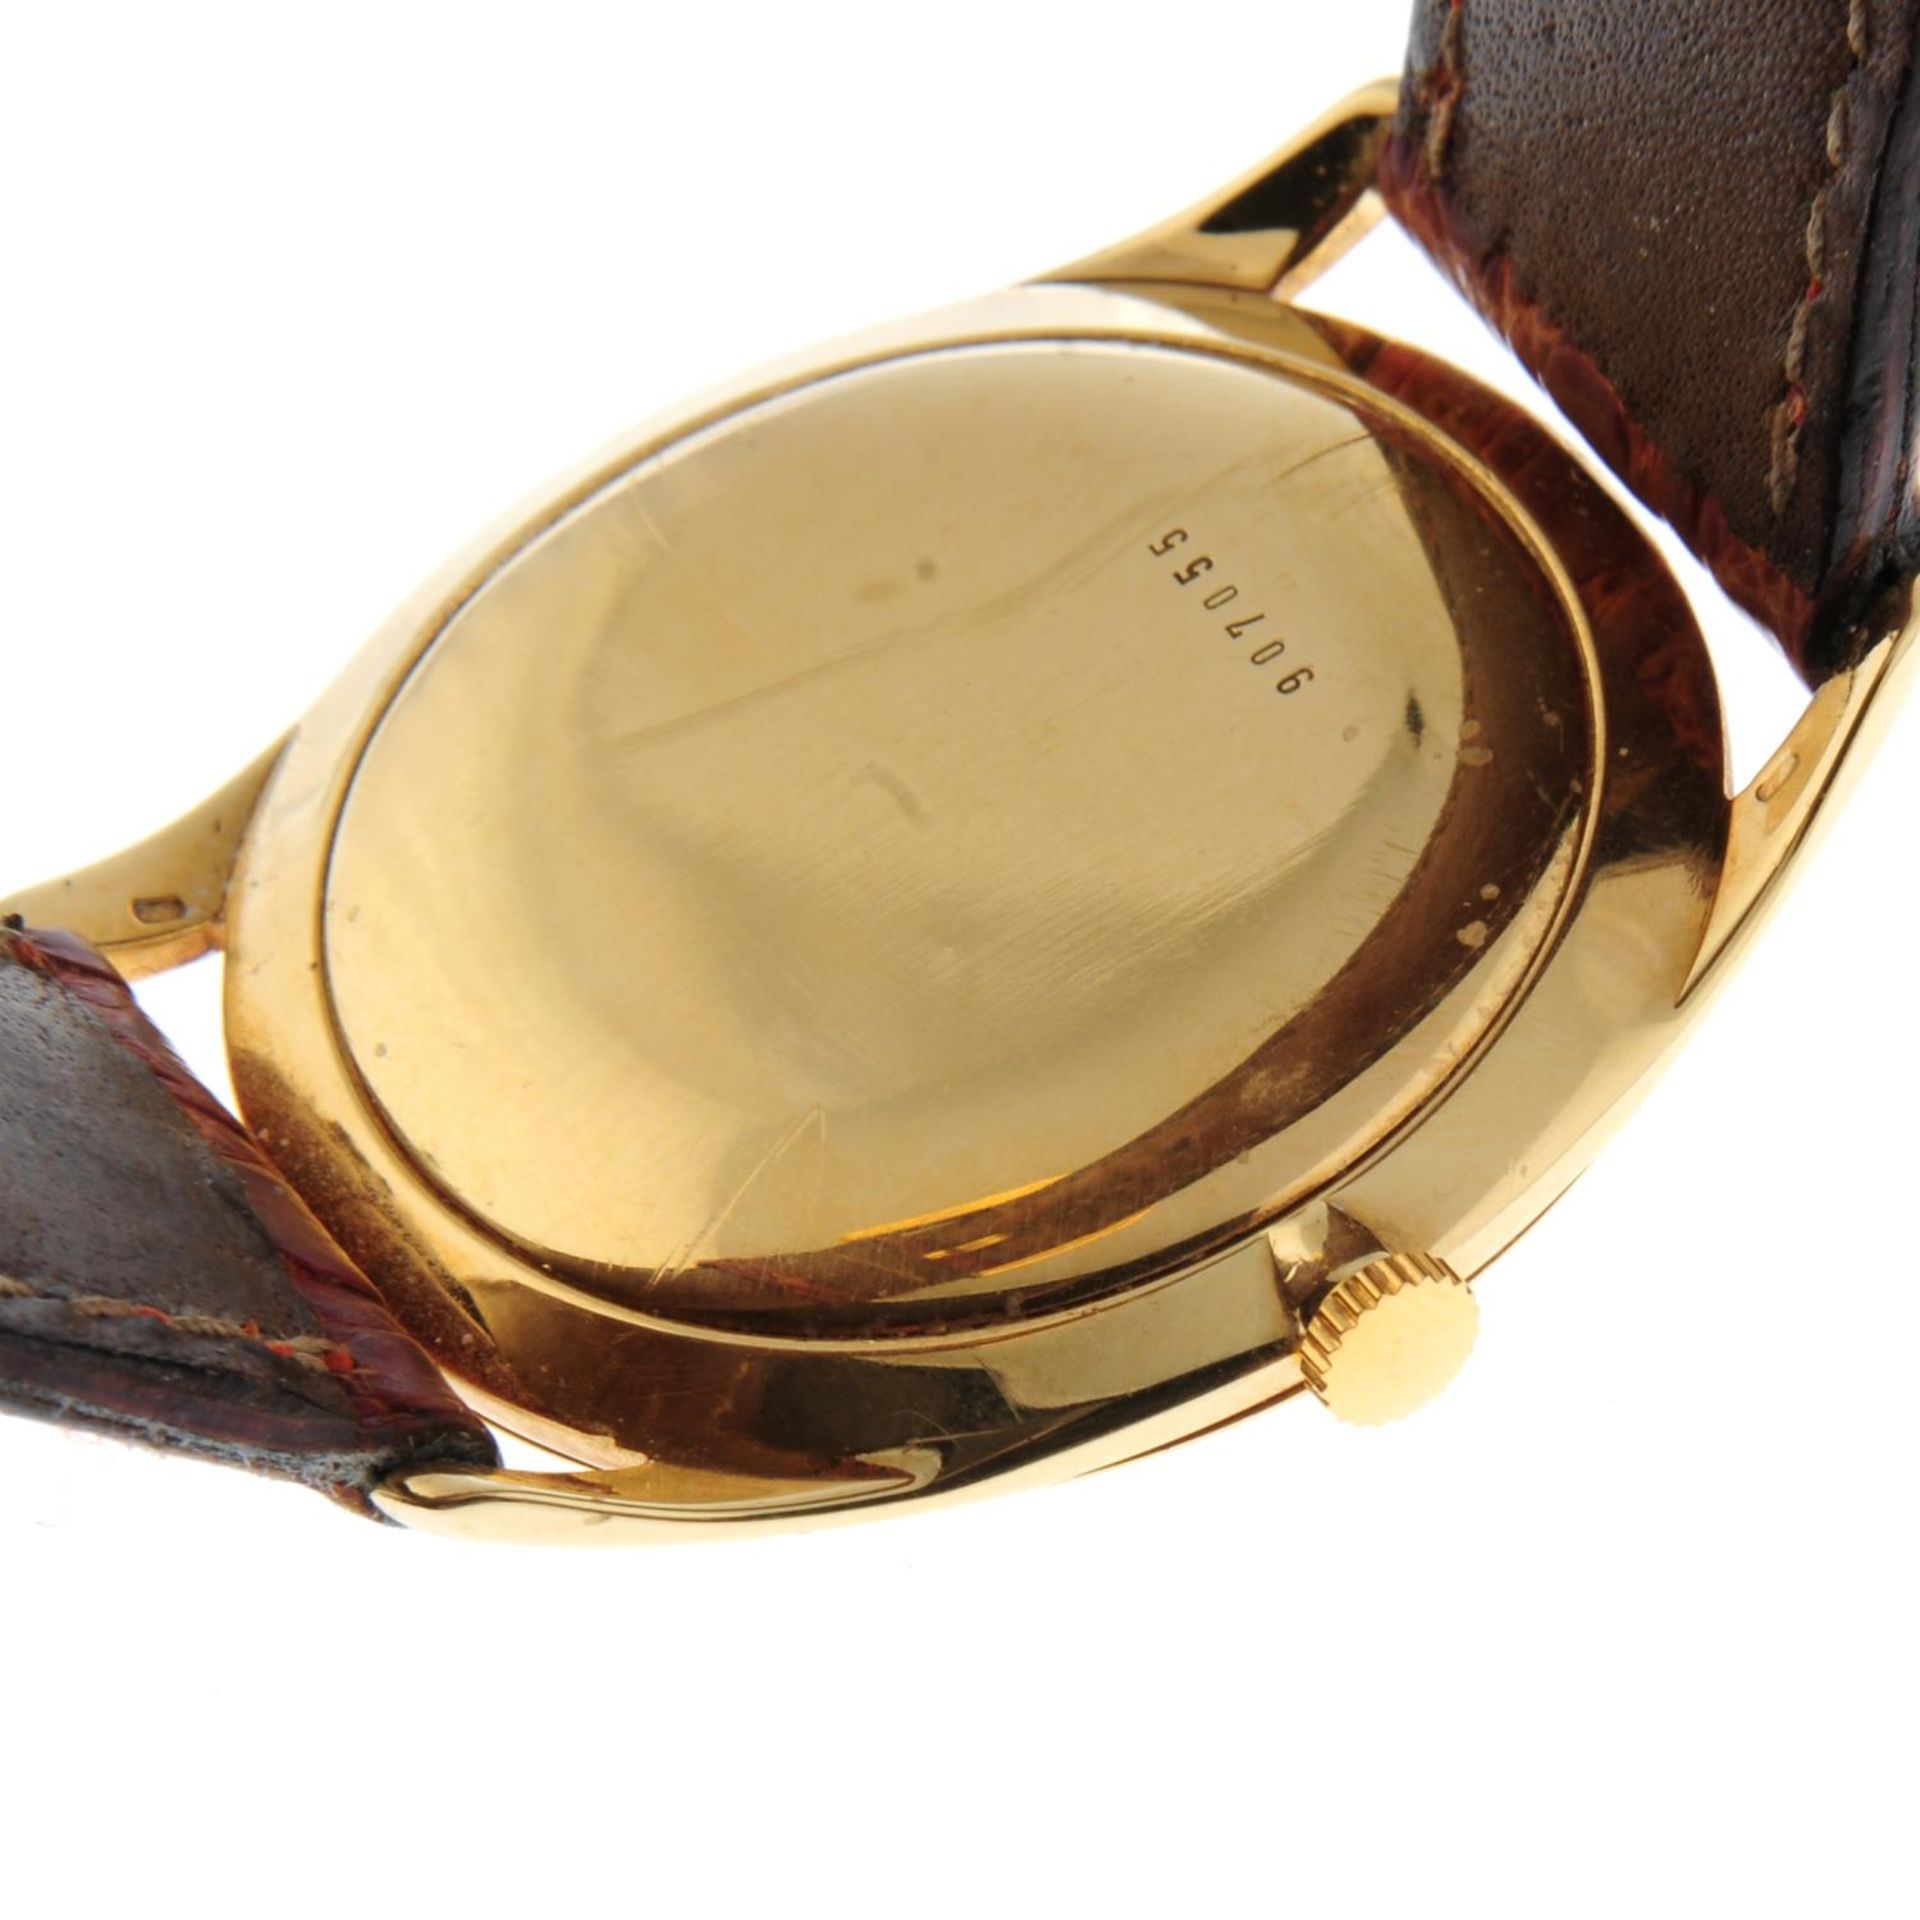 JAEGER-LECOULTRE - a wrist watch. - Image 2 of 6